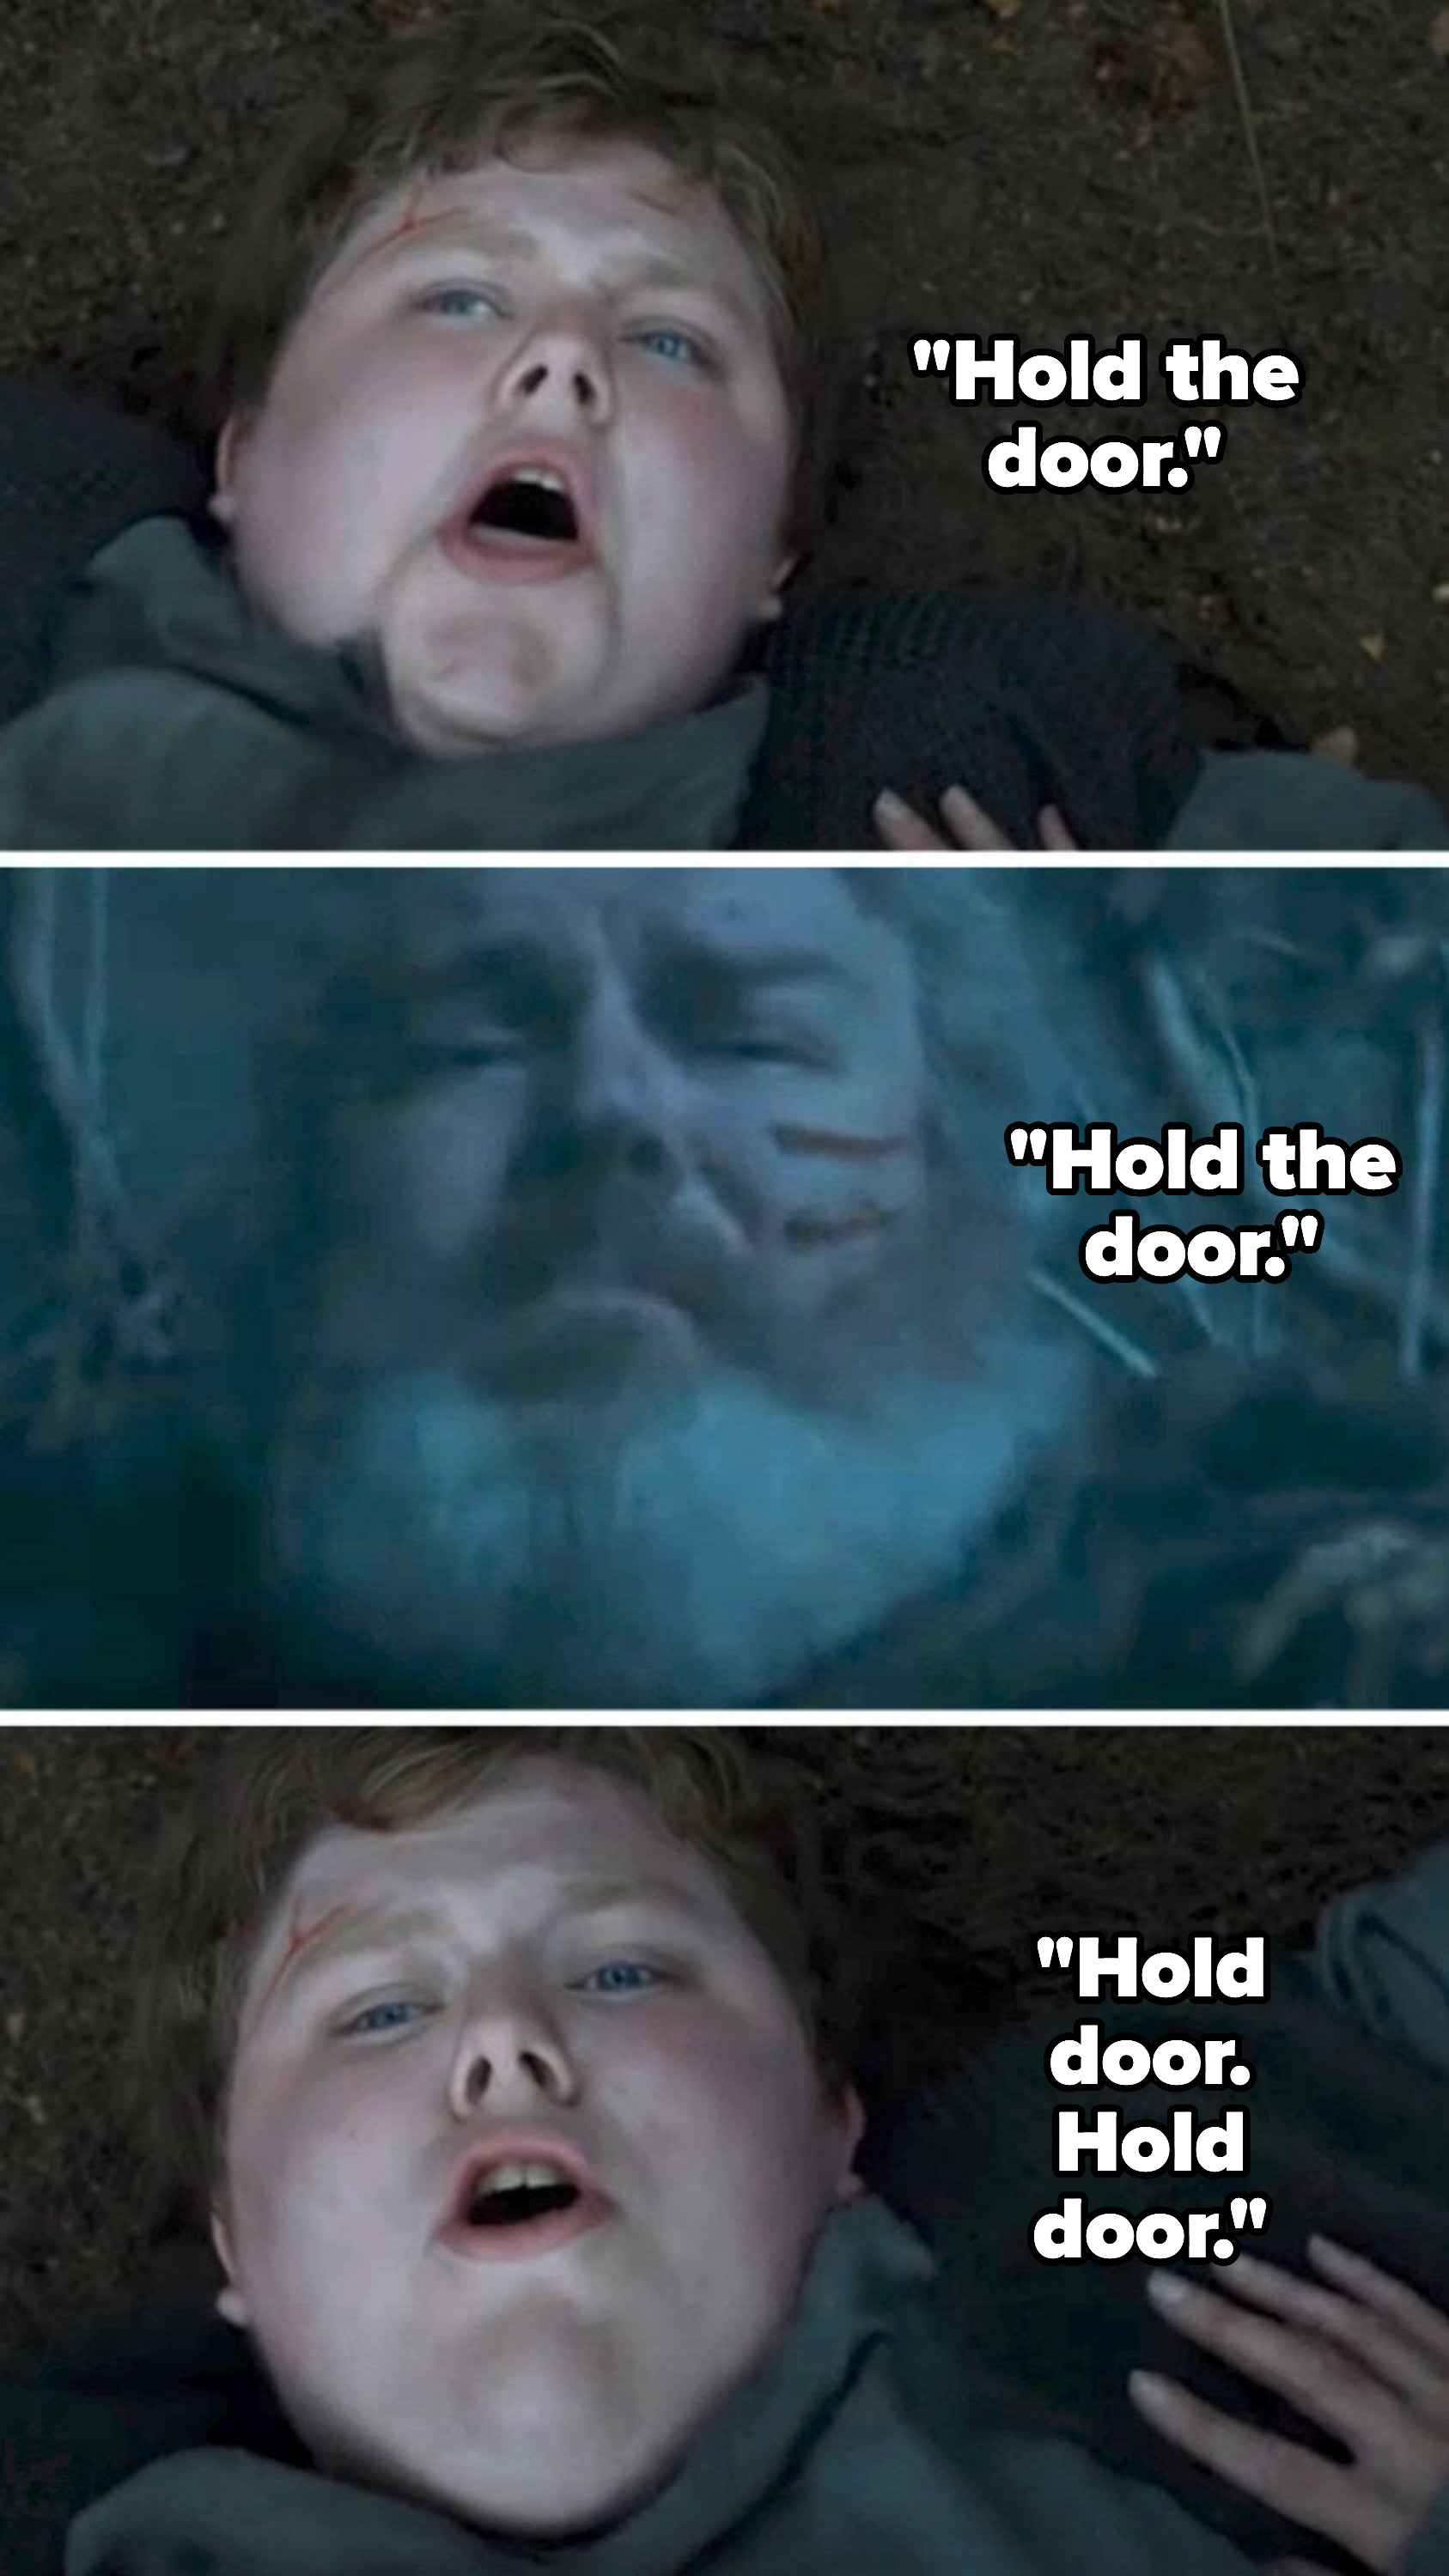 Hodor saying &quot;Hold the door&quot; and &quot;Hold door&quot; repeatedly